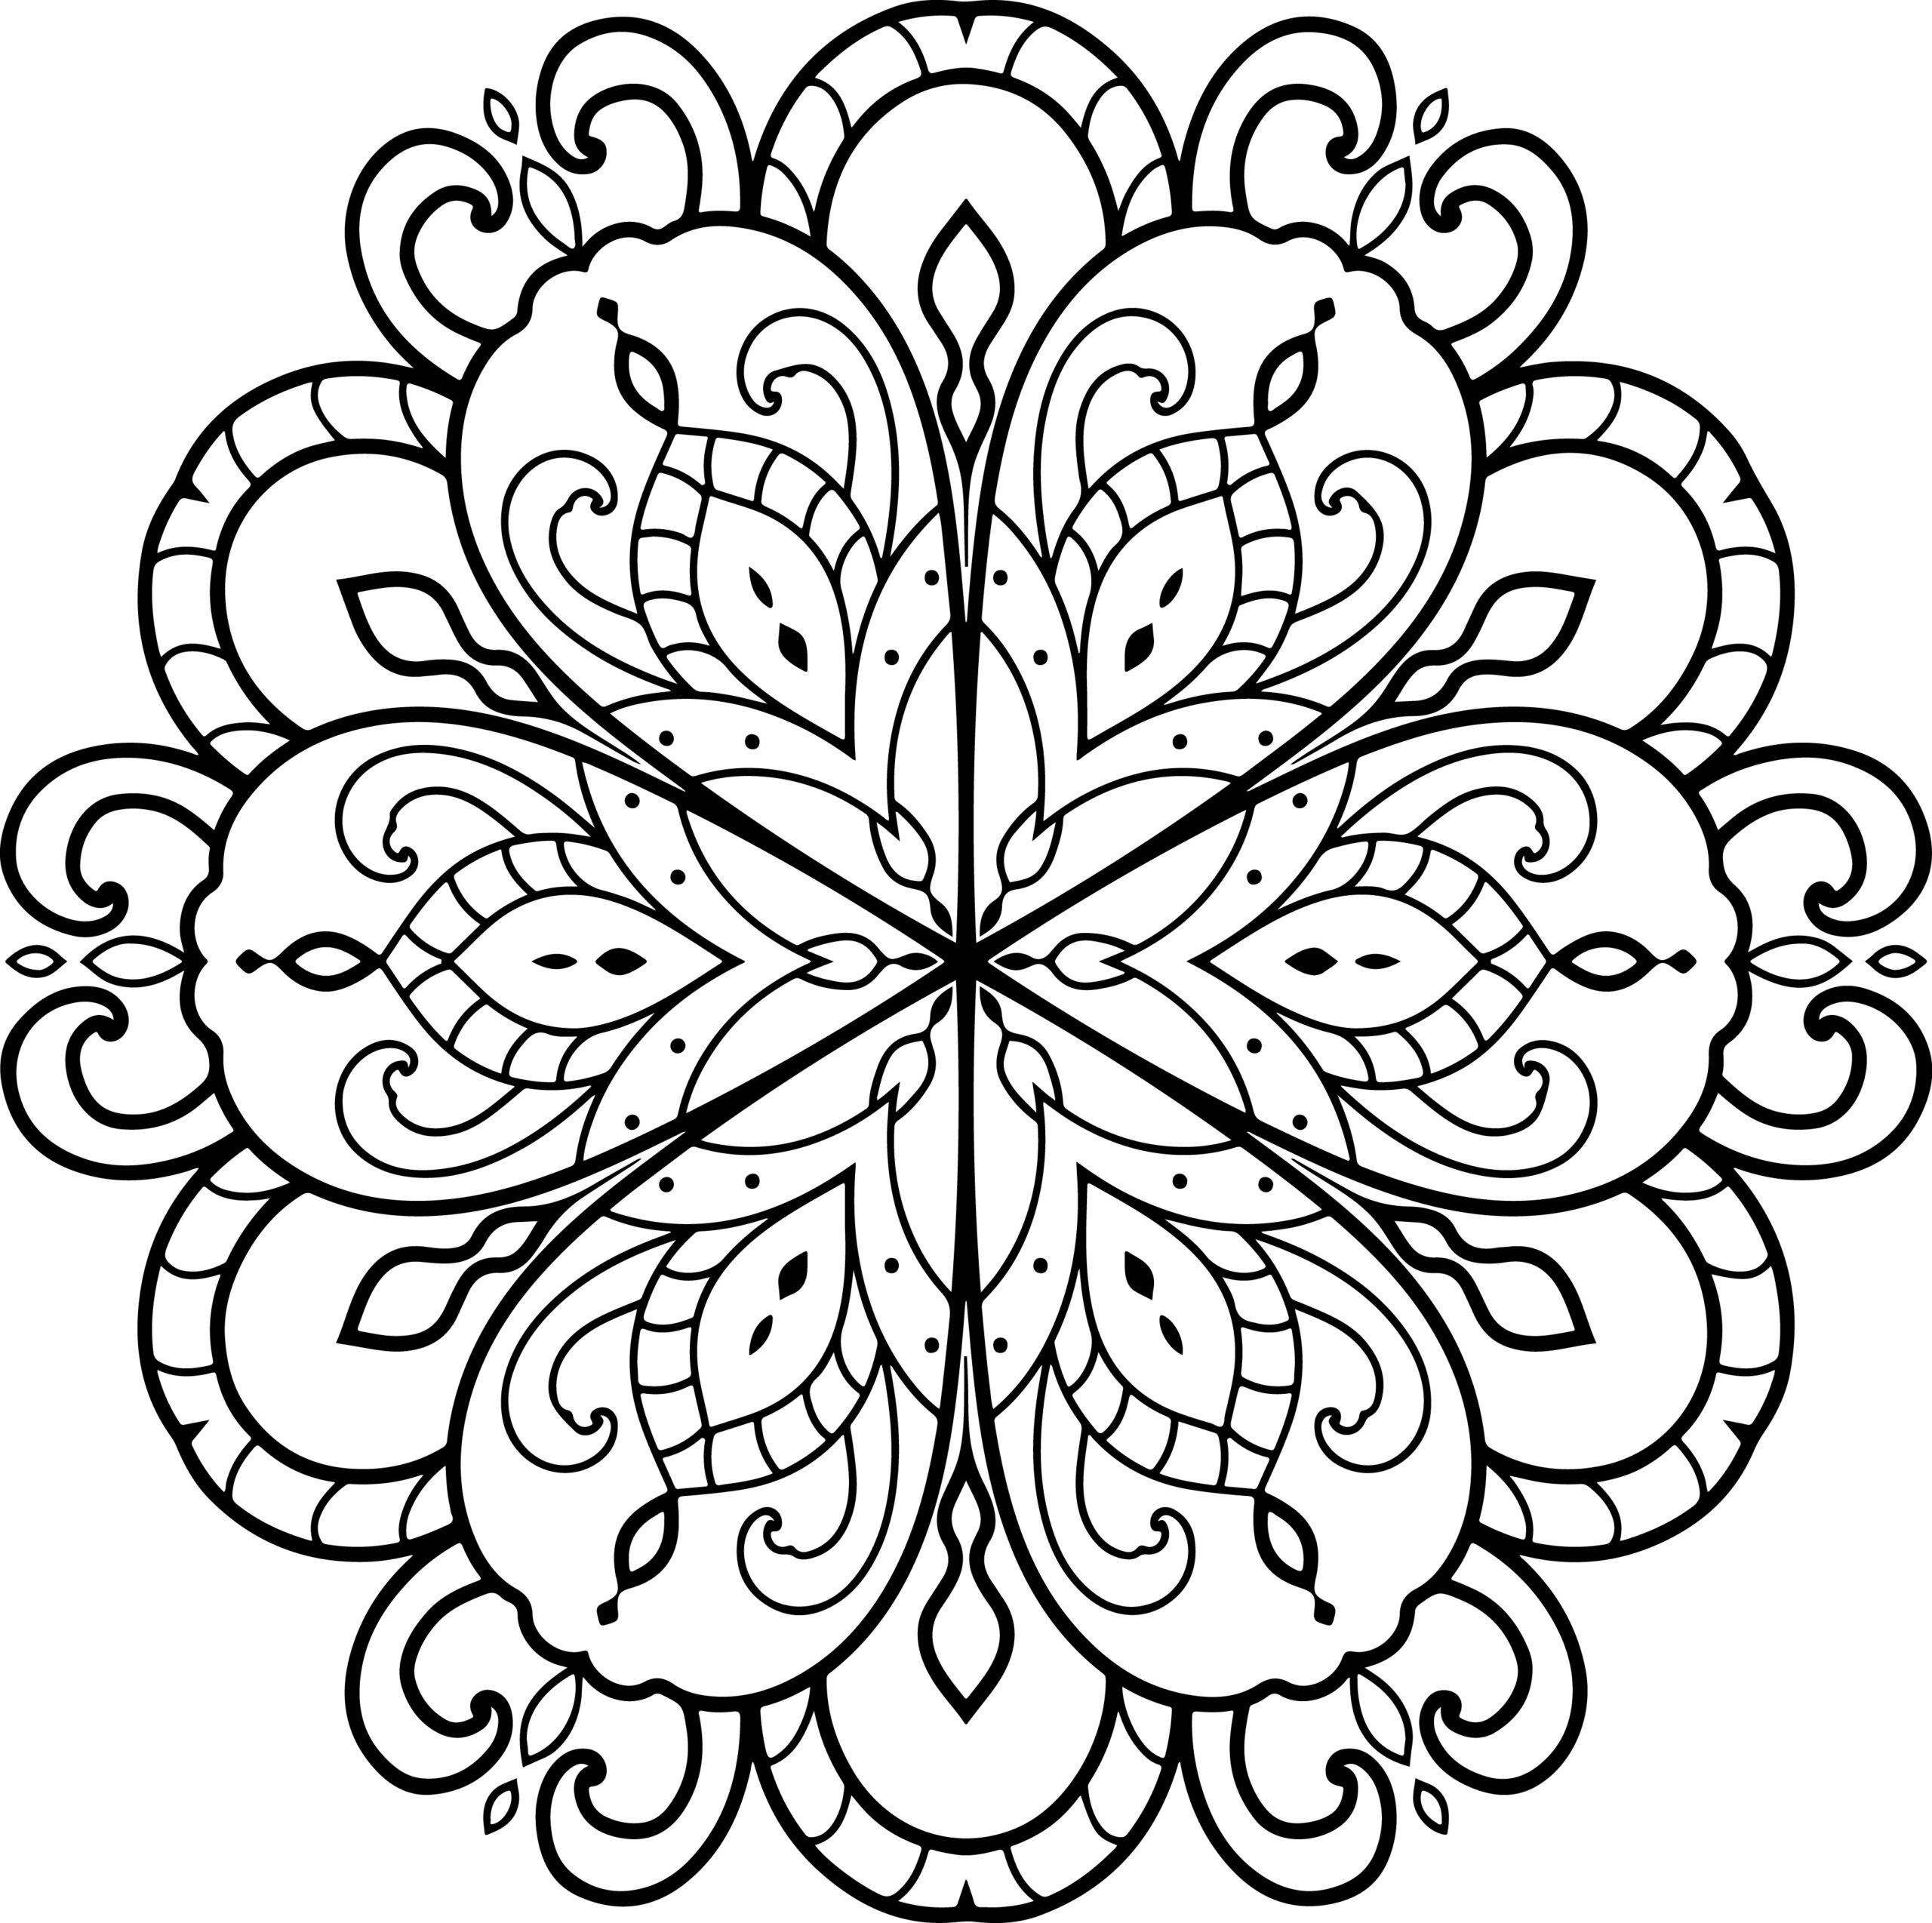 Simple mandalas coloring book with easy and simple mandala patterns for kids made by teachers